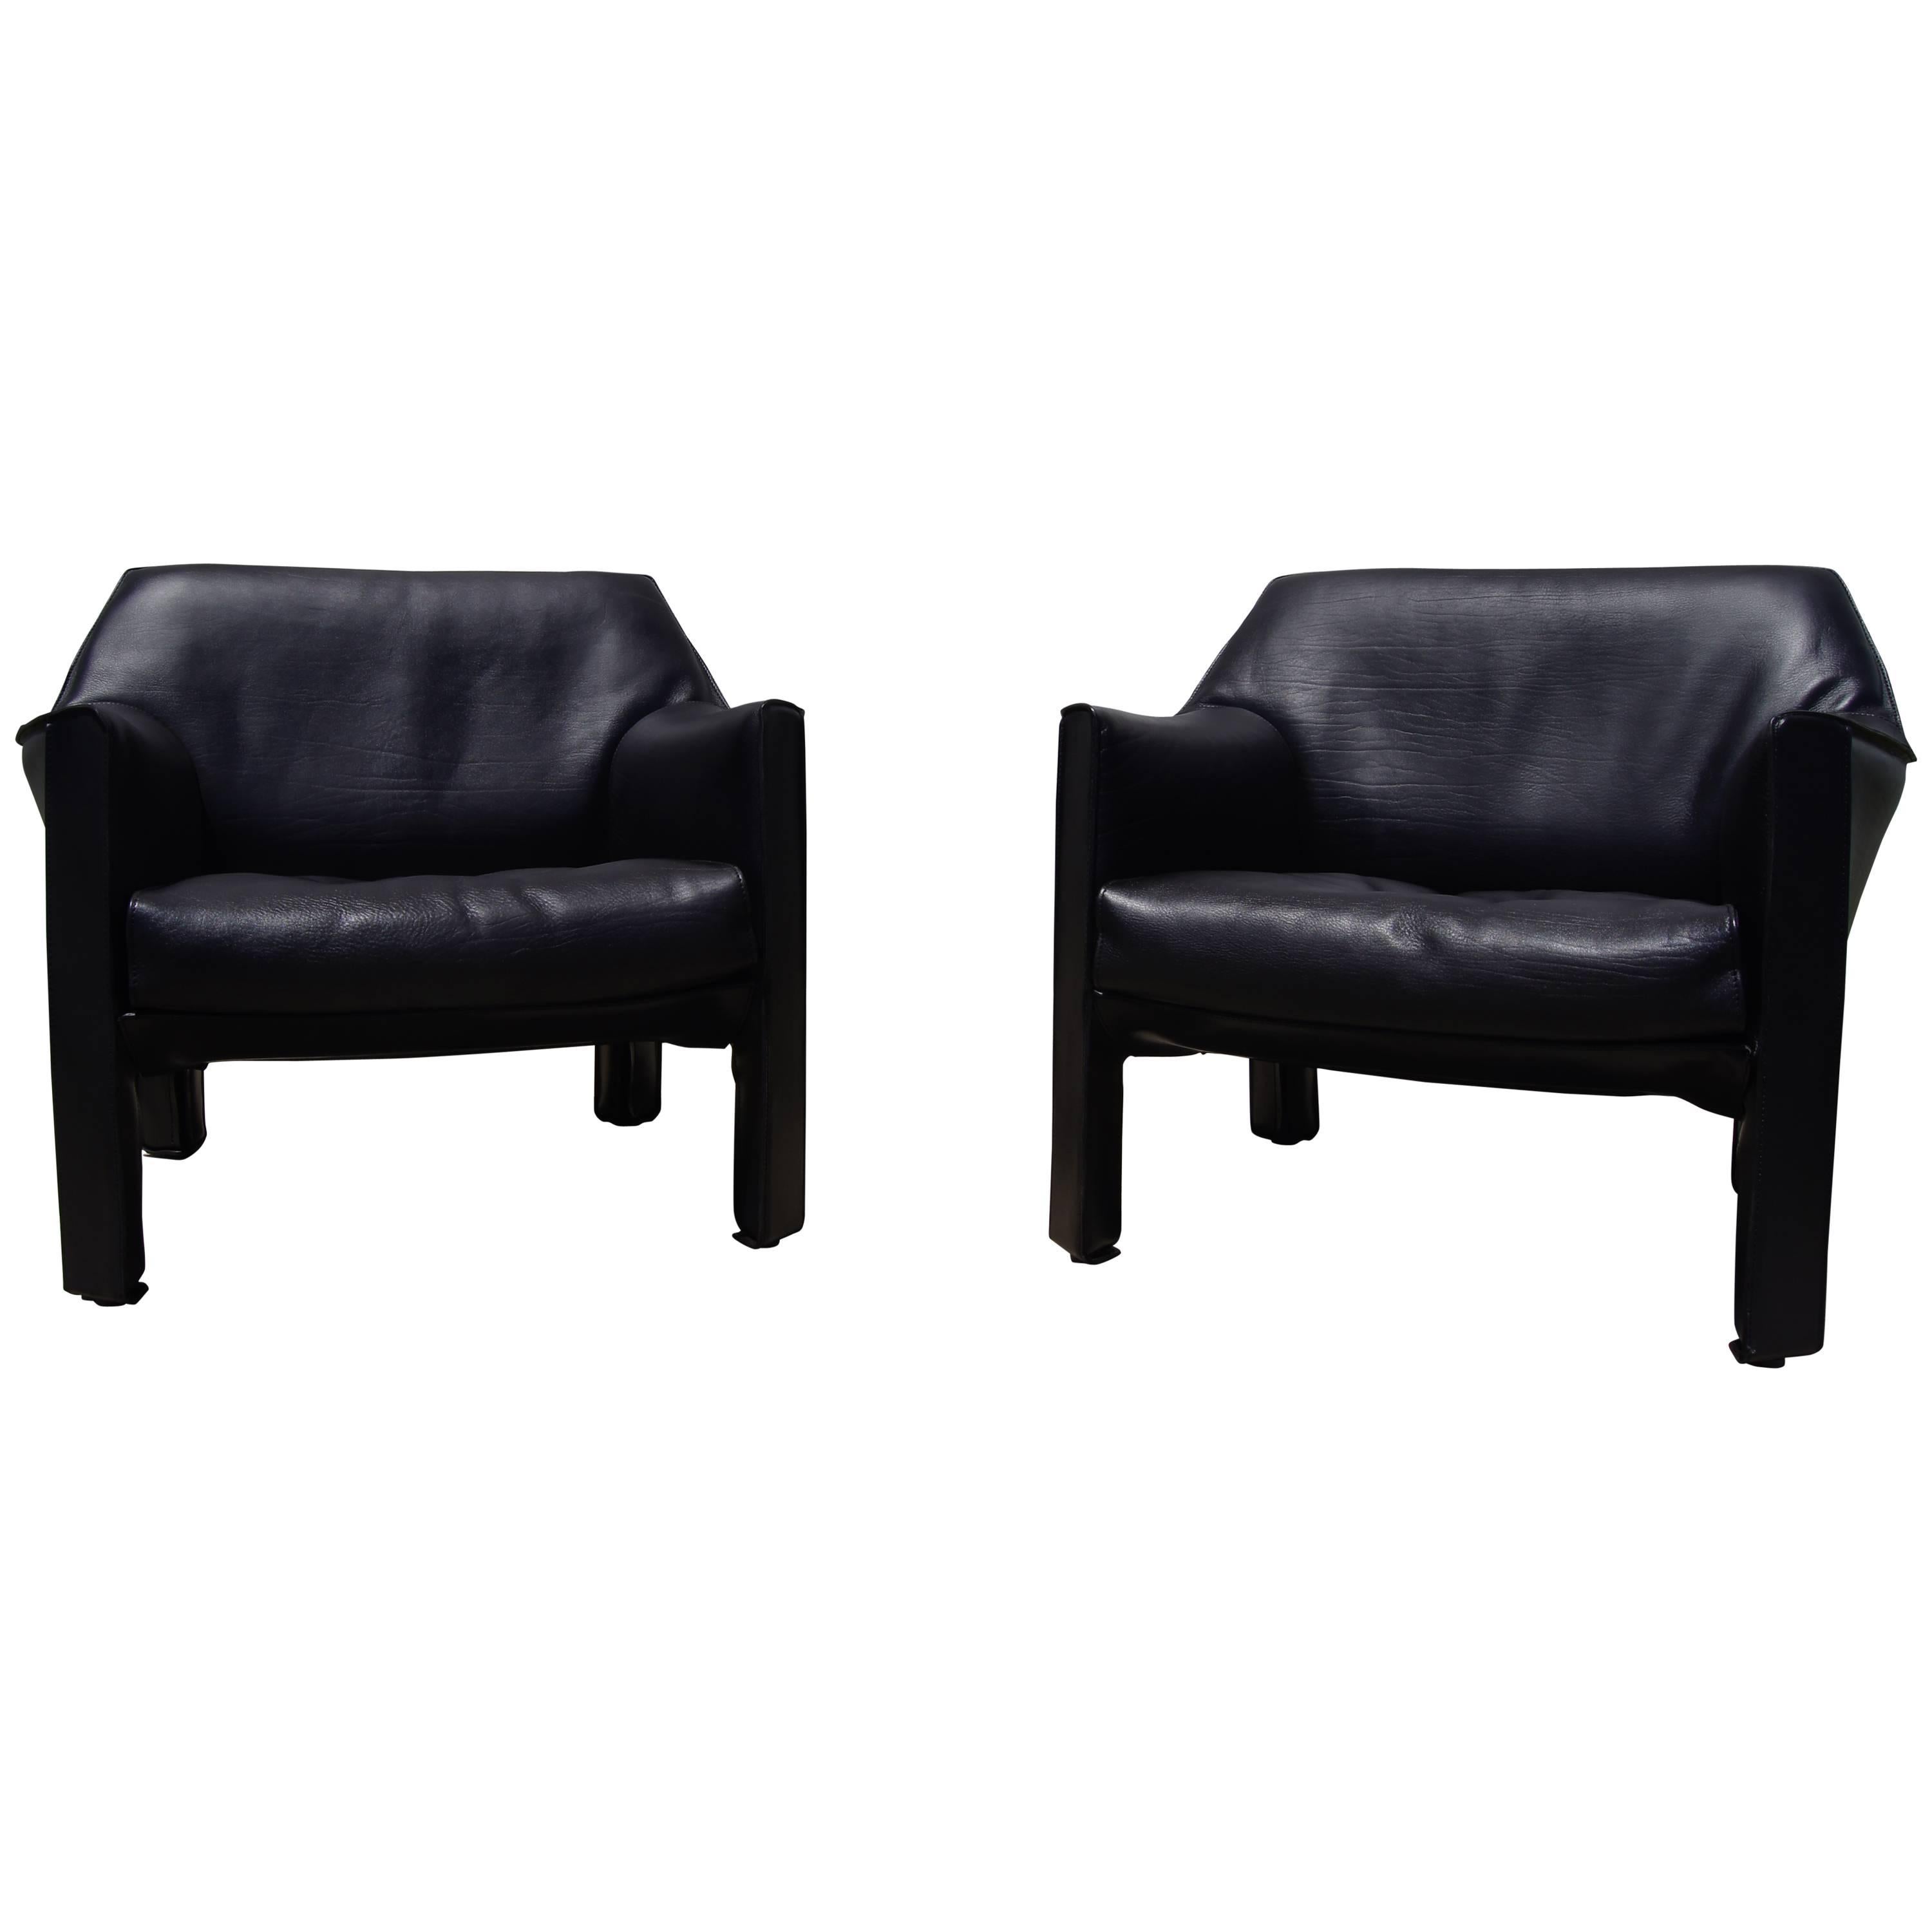 Pair of Black Leather Cab Armchairs by Mario Bellini for Cassina